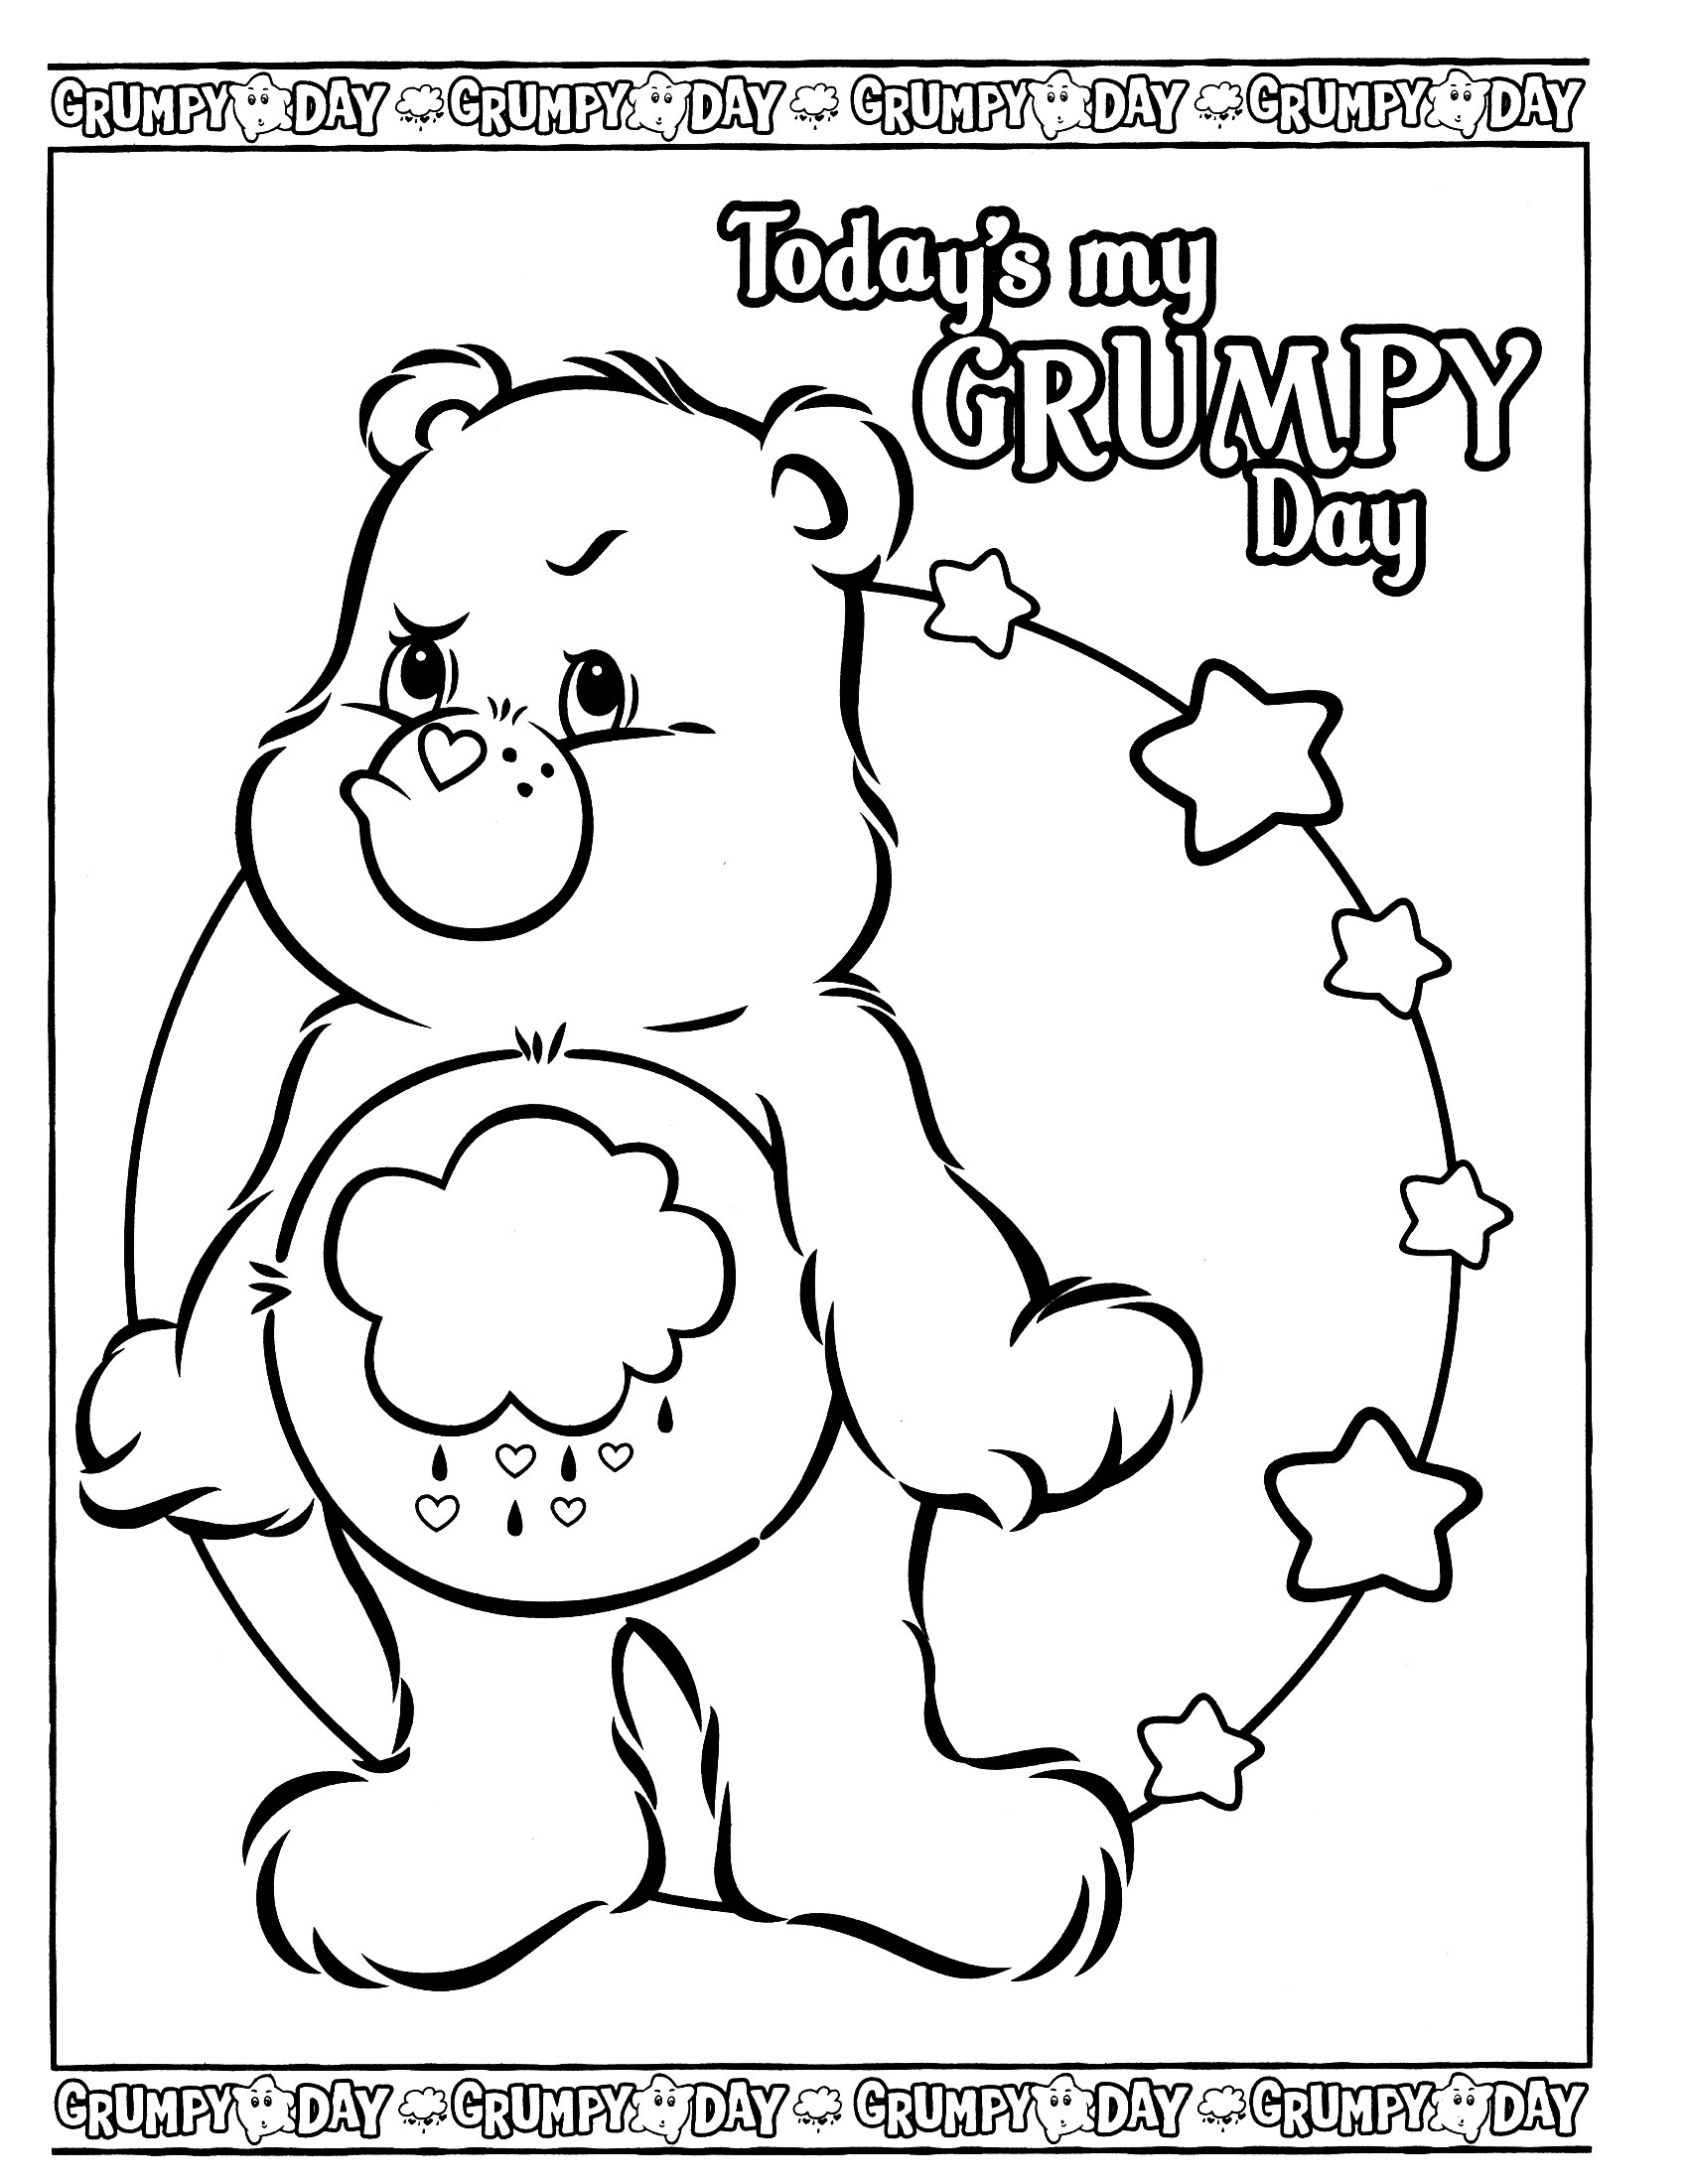 Care Bears #37375 (Cartoons) Free Printable Coloring Pages